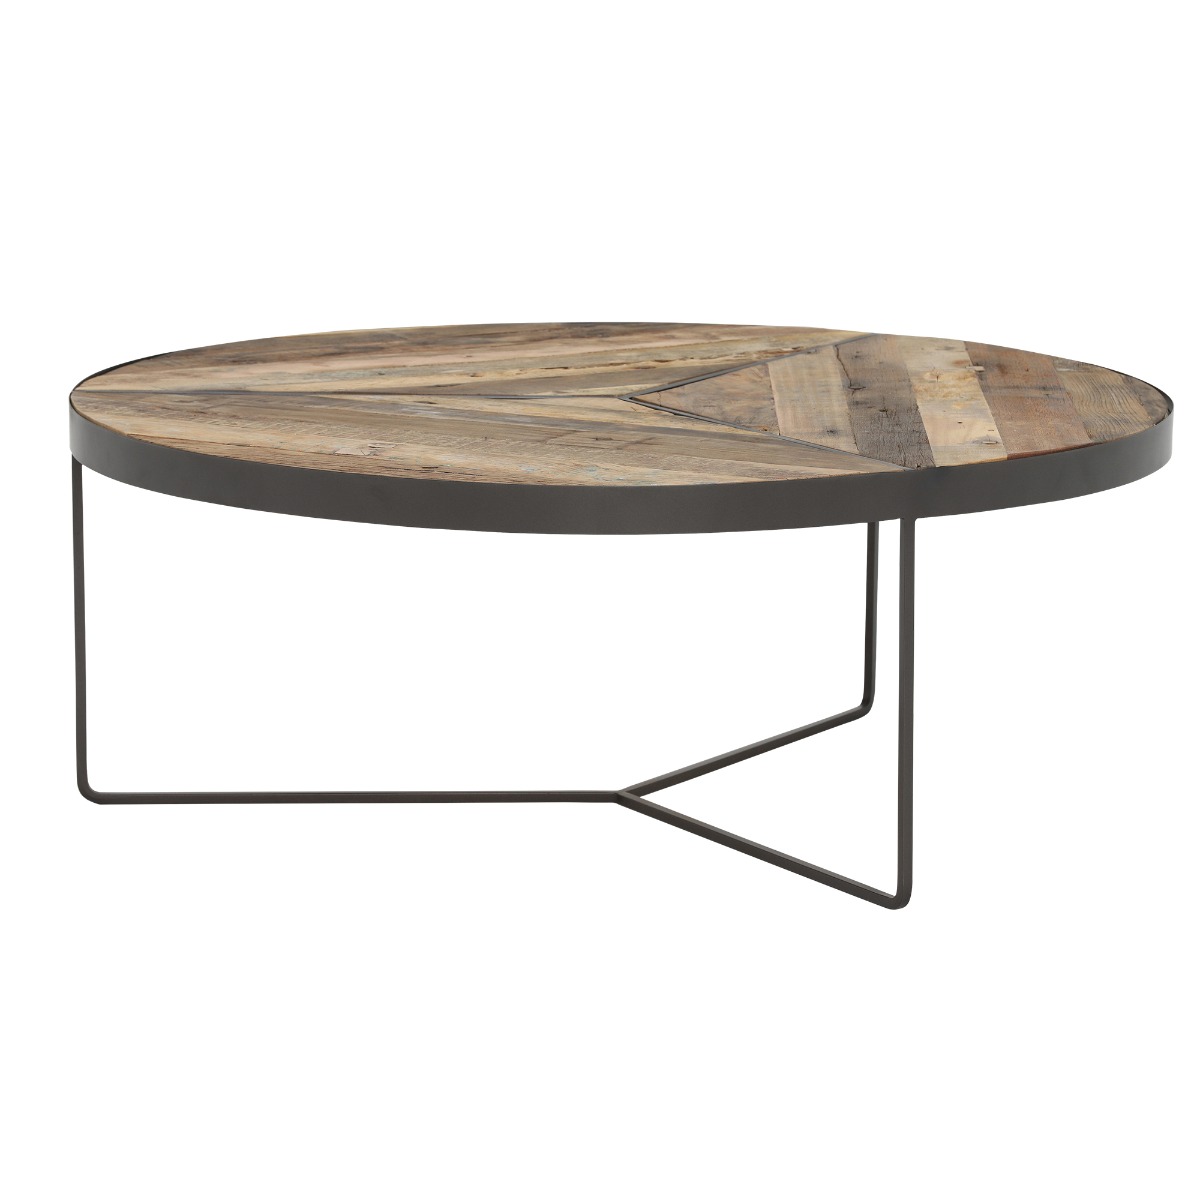 Taiga Large Round Rustic Coffee Table, Brown | Barker & Stonehouse